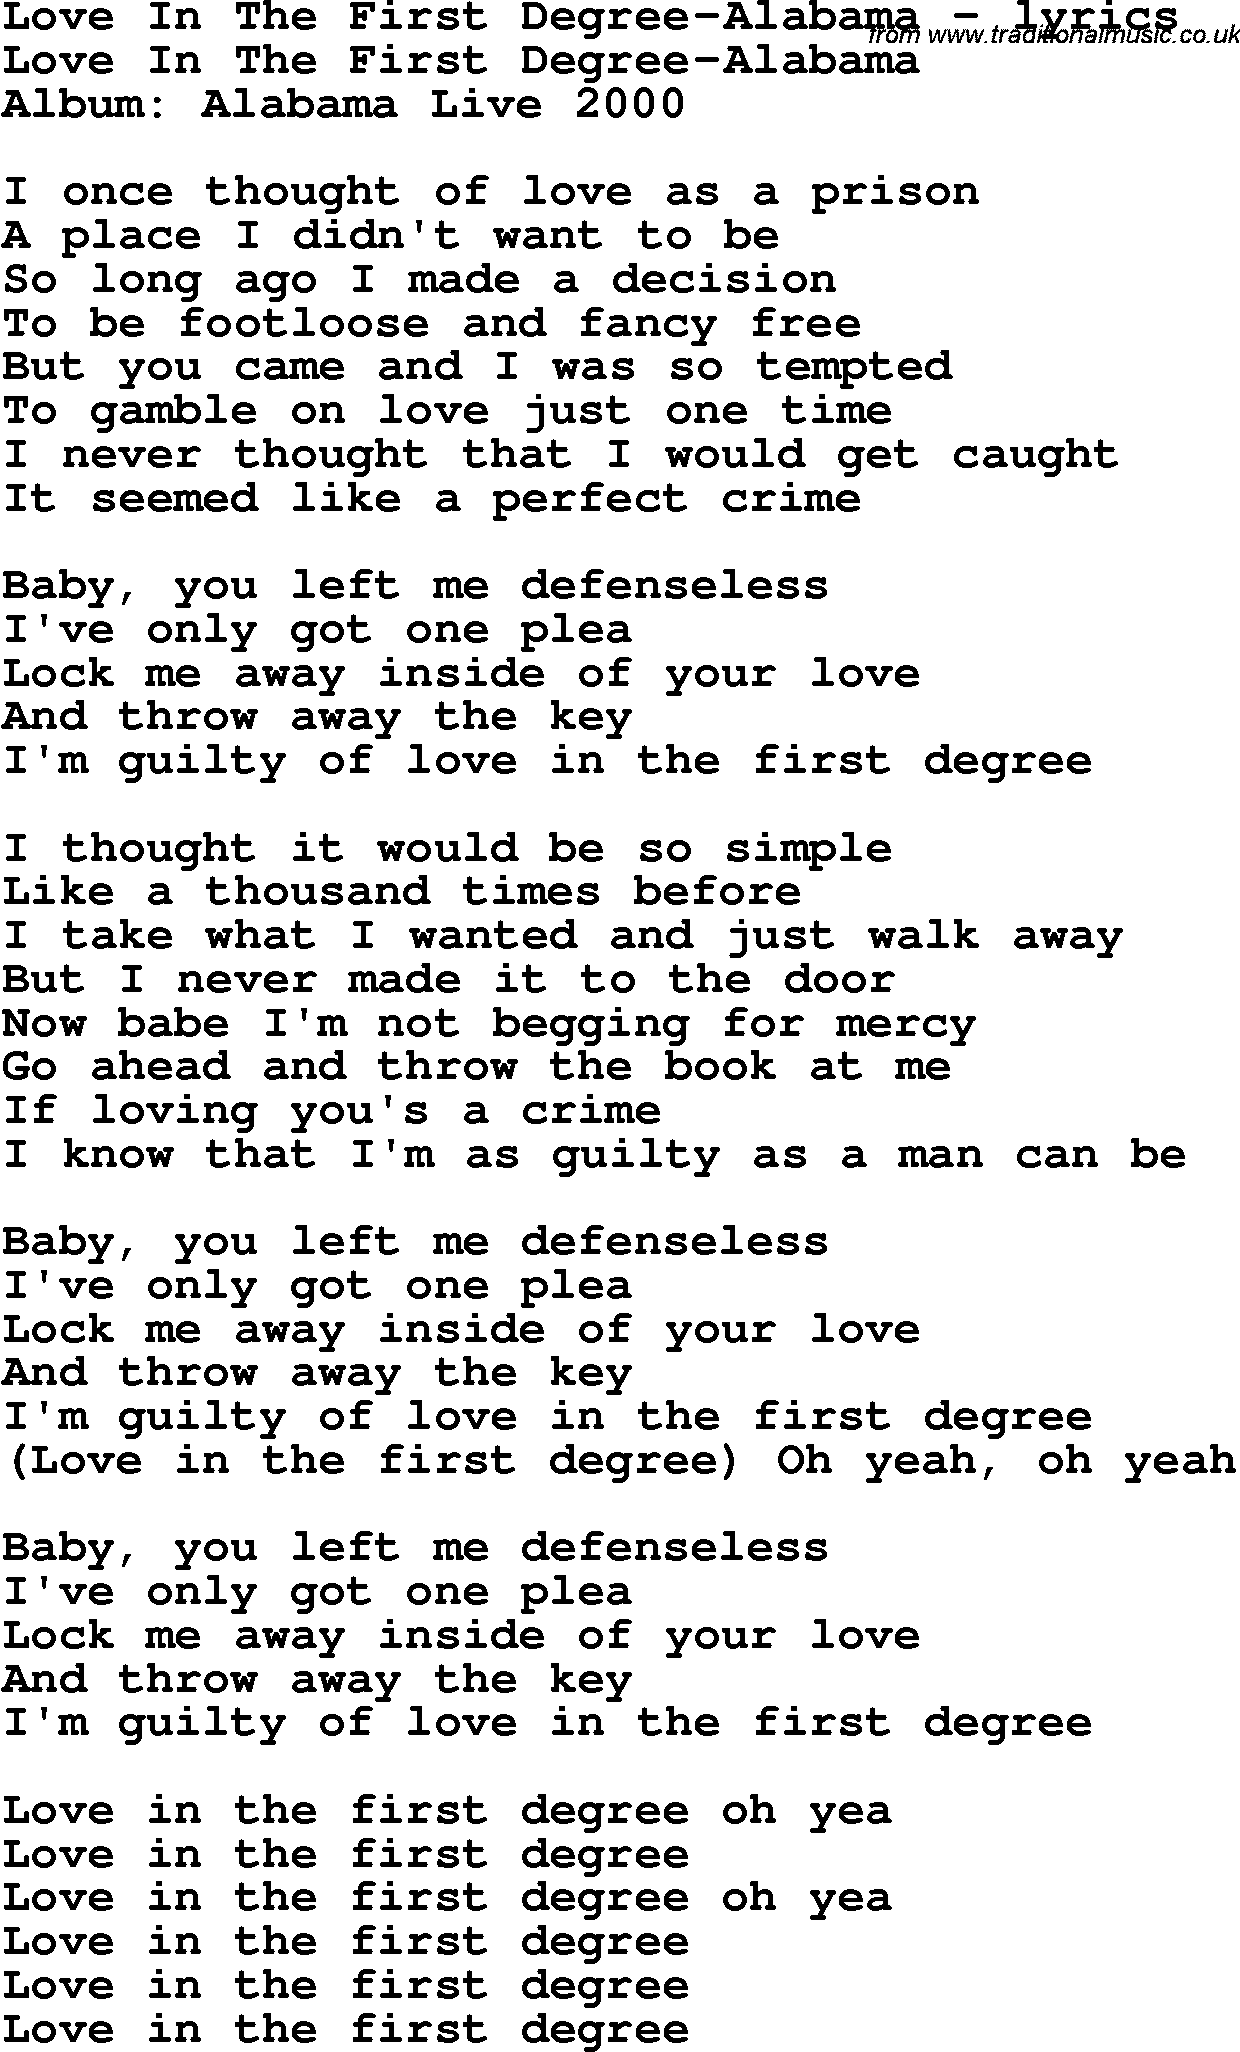 Love Song Lyrics for: Love In The First Degree-Alabama